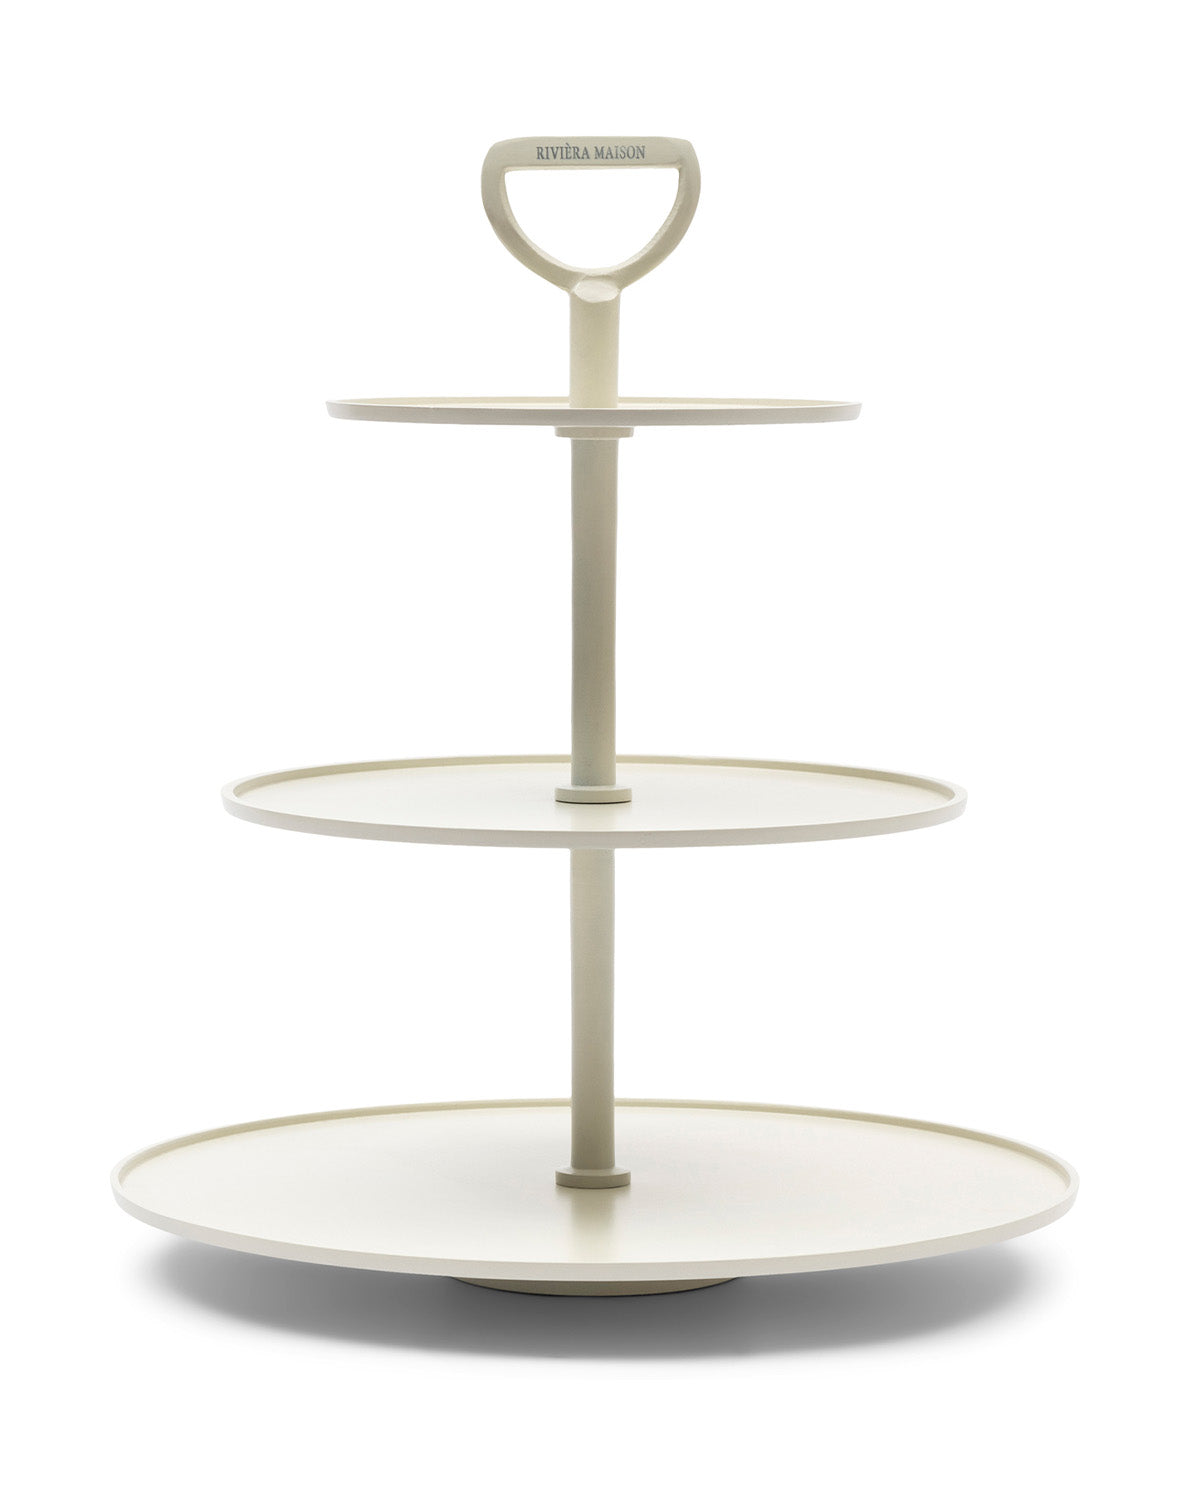 ETAGÈRE white color, made of aluminum, three trays with a top handle